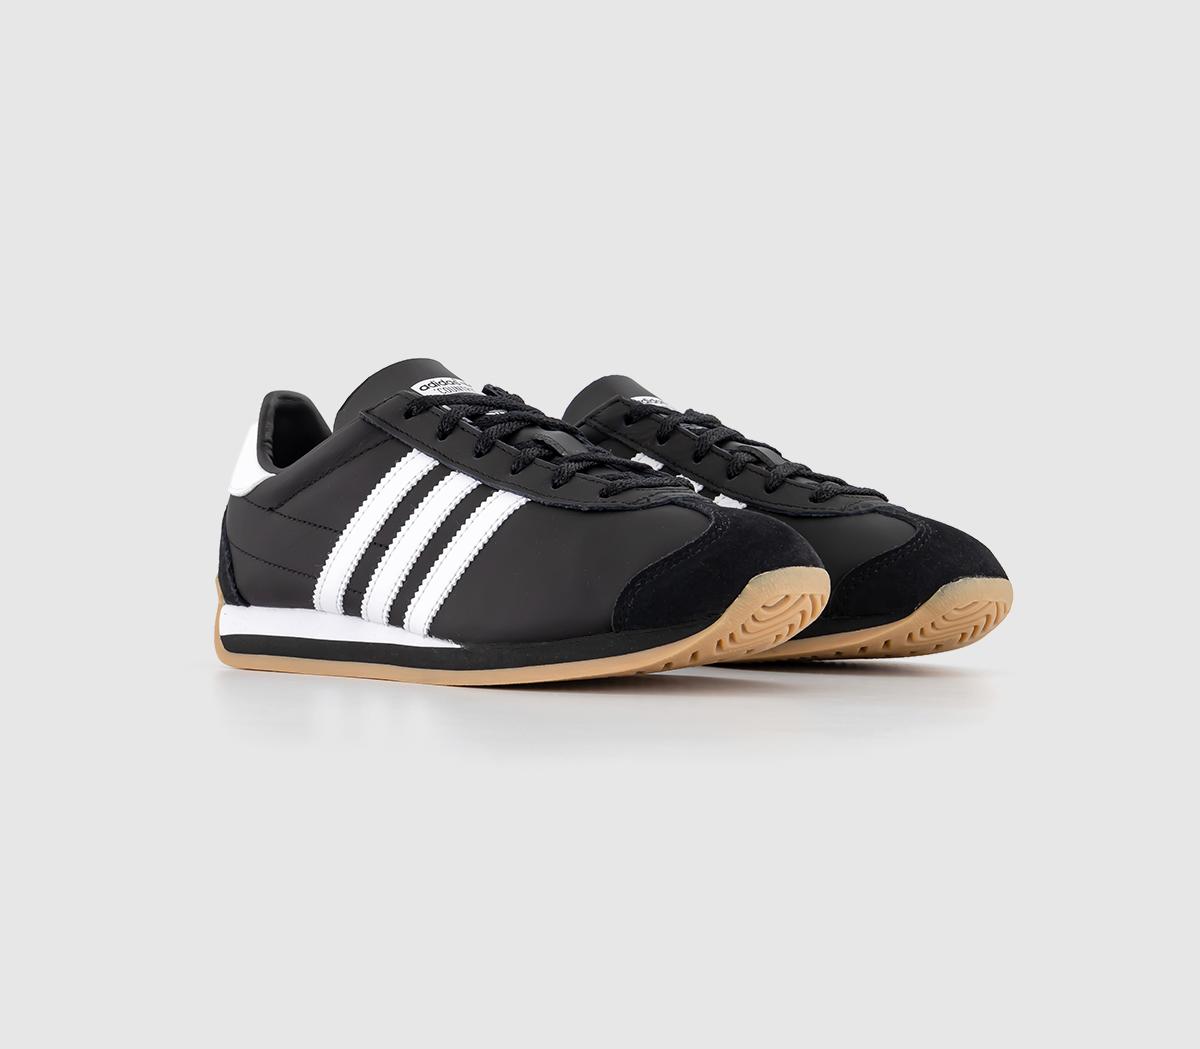 Adidas Country Og Trainers Core Black Core Black White Leather, 9